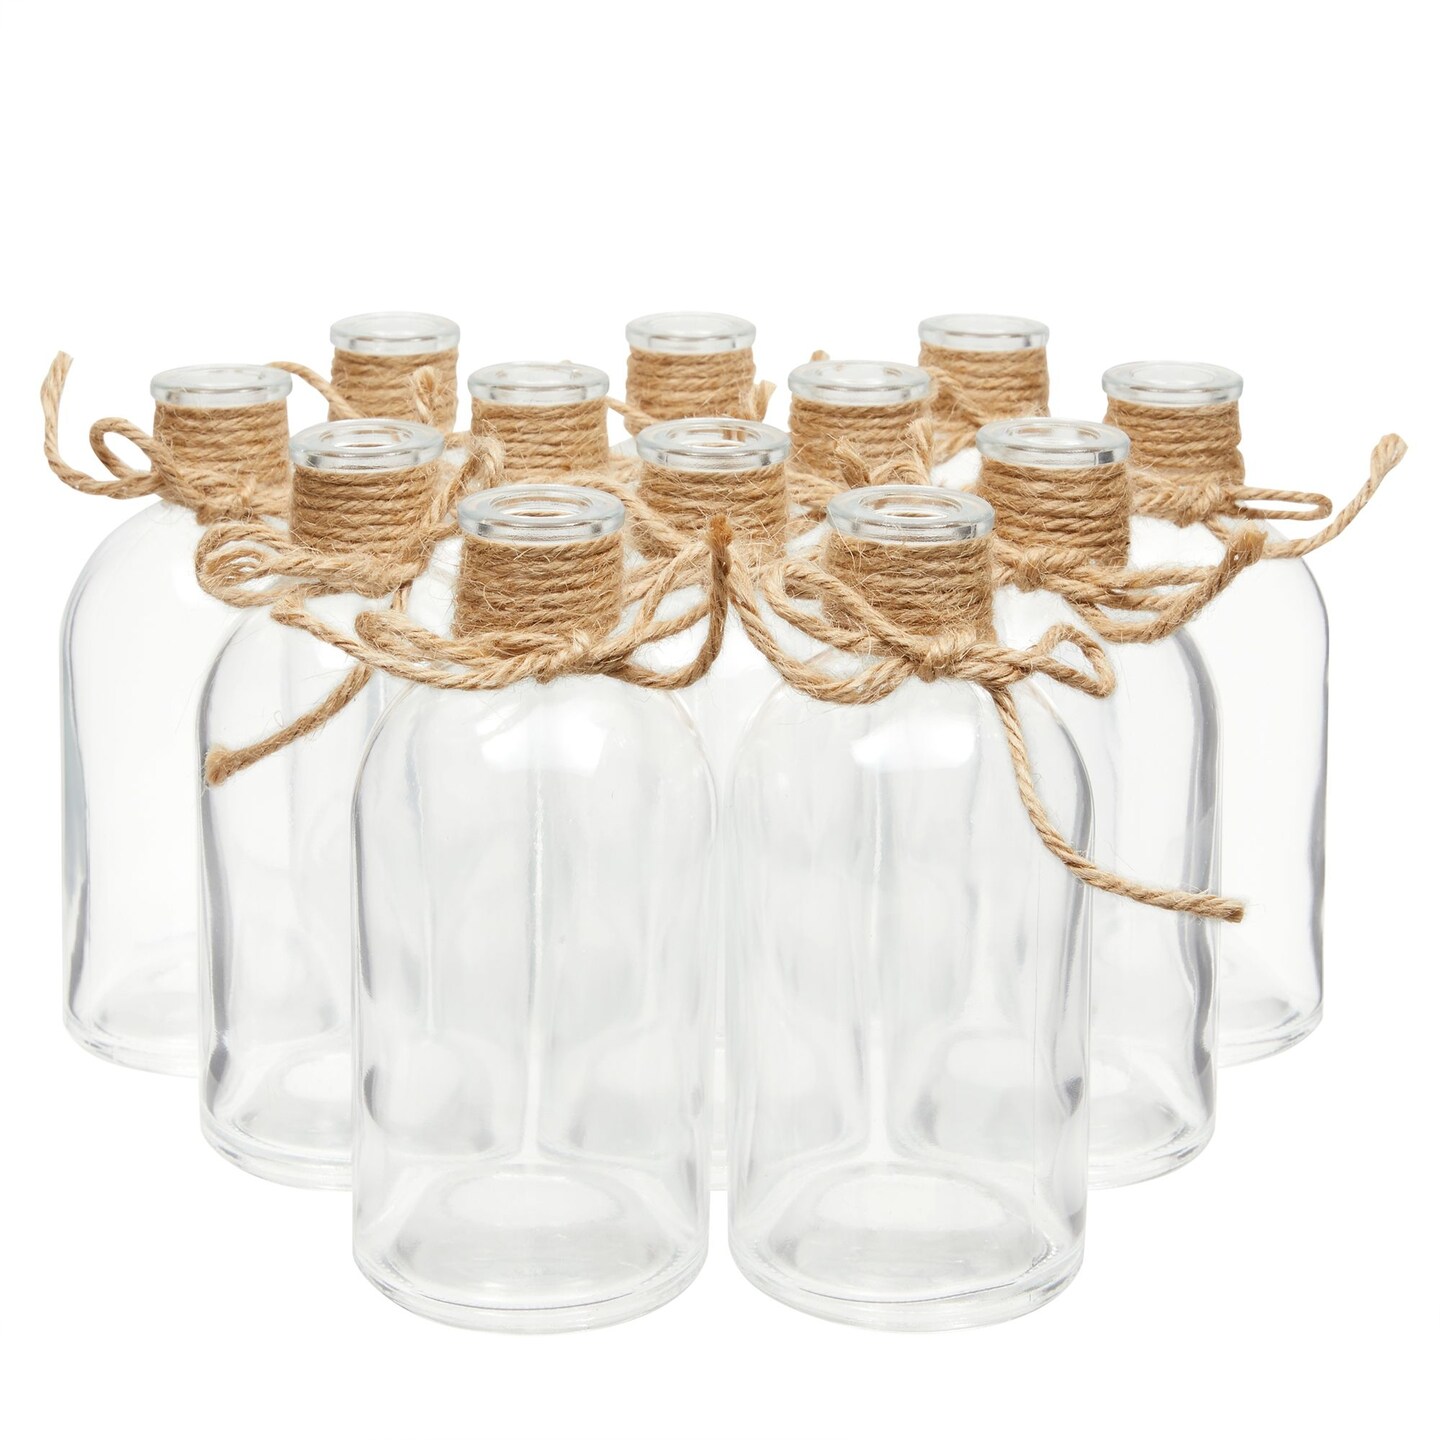 Farmlyn Creek Set of 12 Glass Bud Vases - Small Glass Vases for Flowers, Centerpieces, Party D&#xE9;cor (2.5 In x 5.2 In)